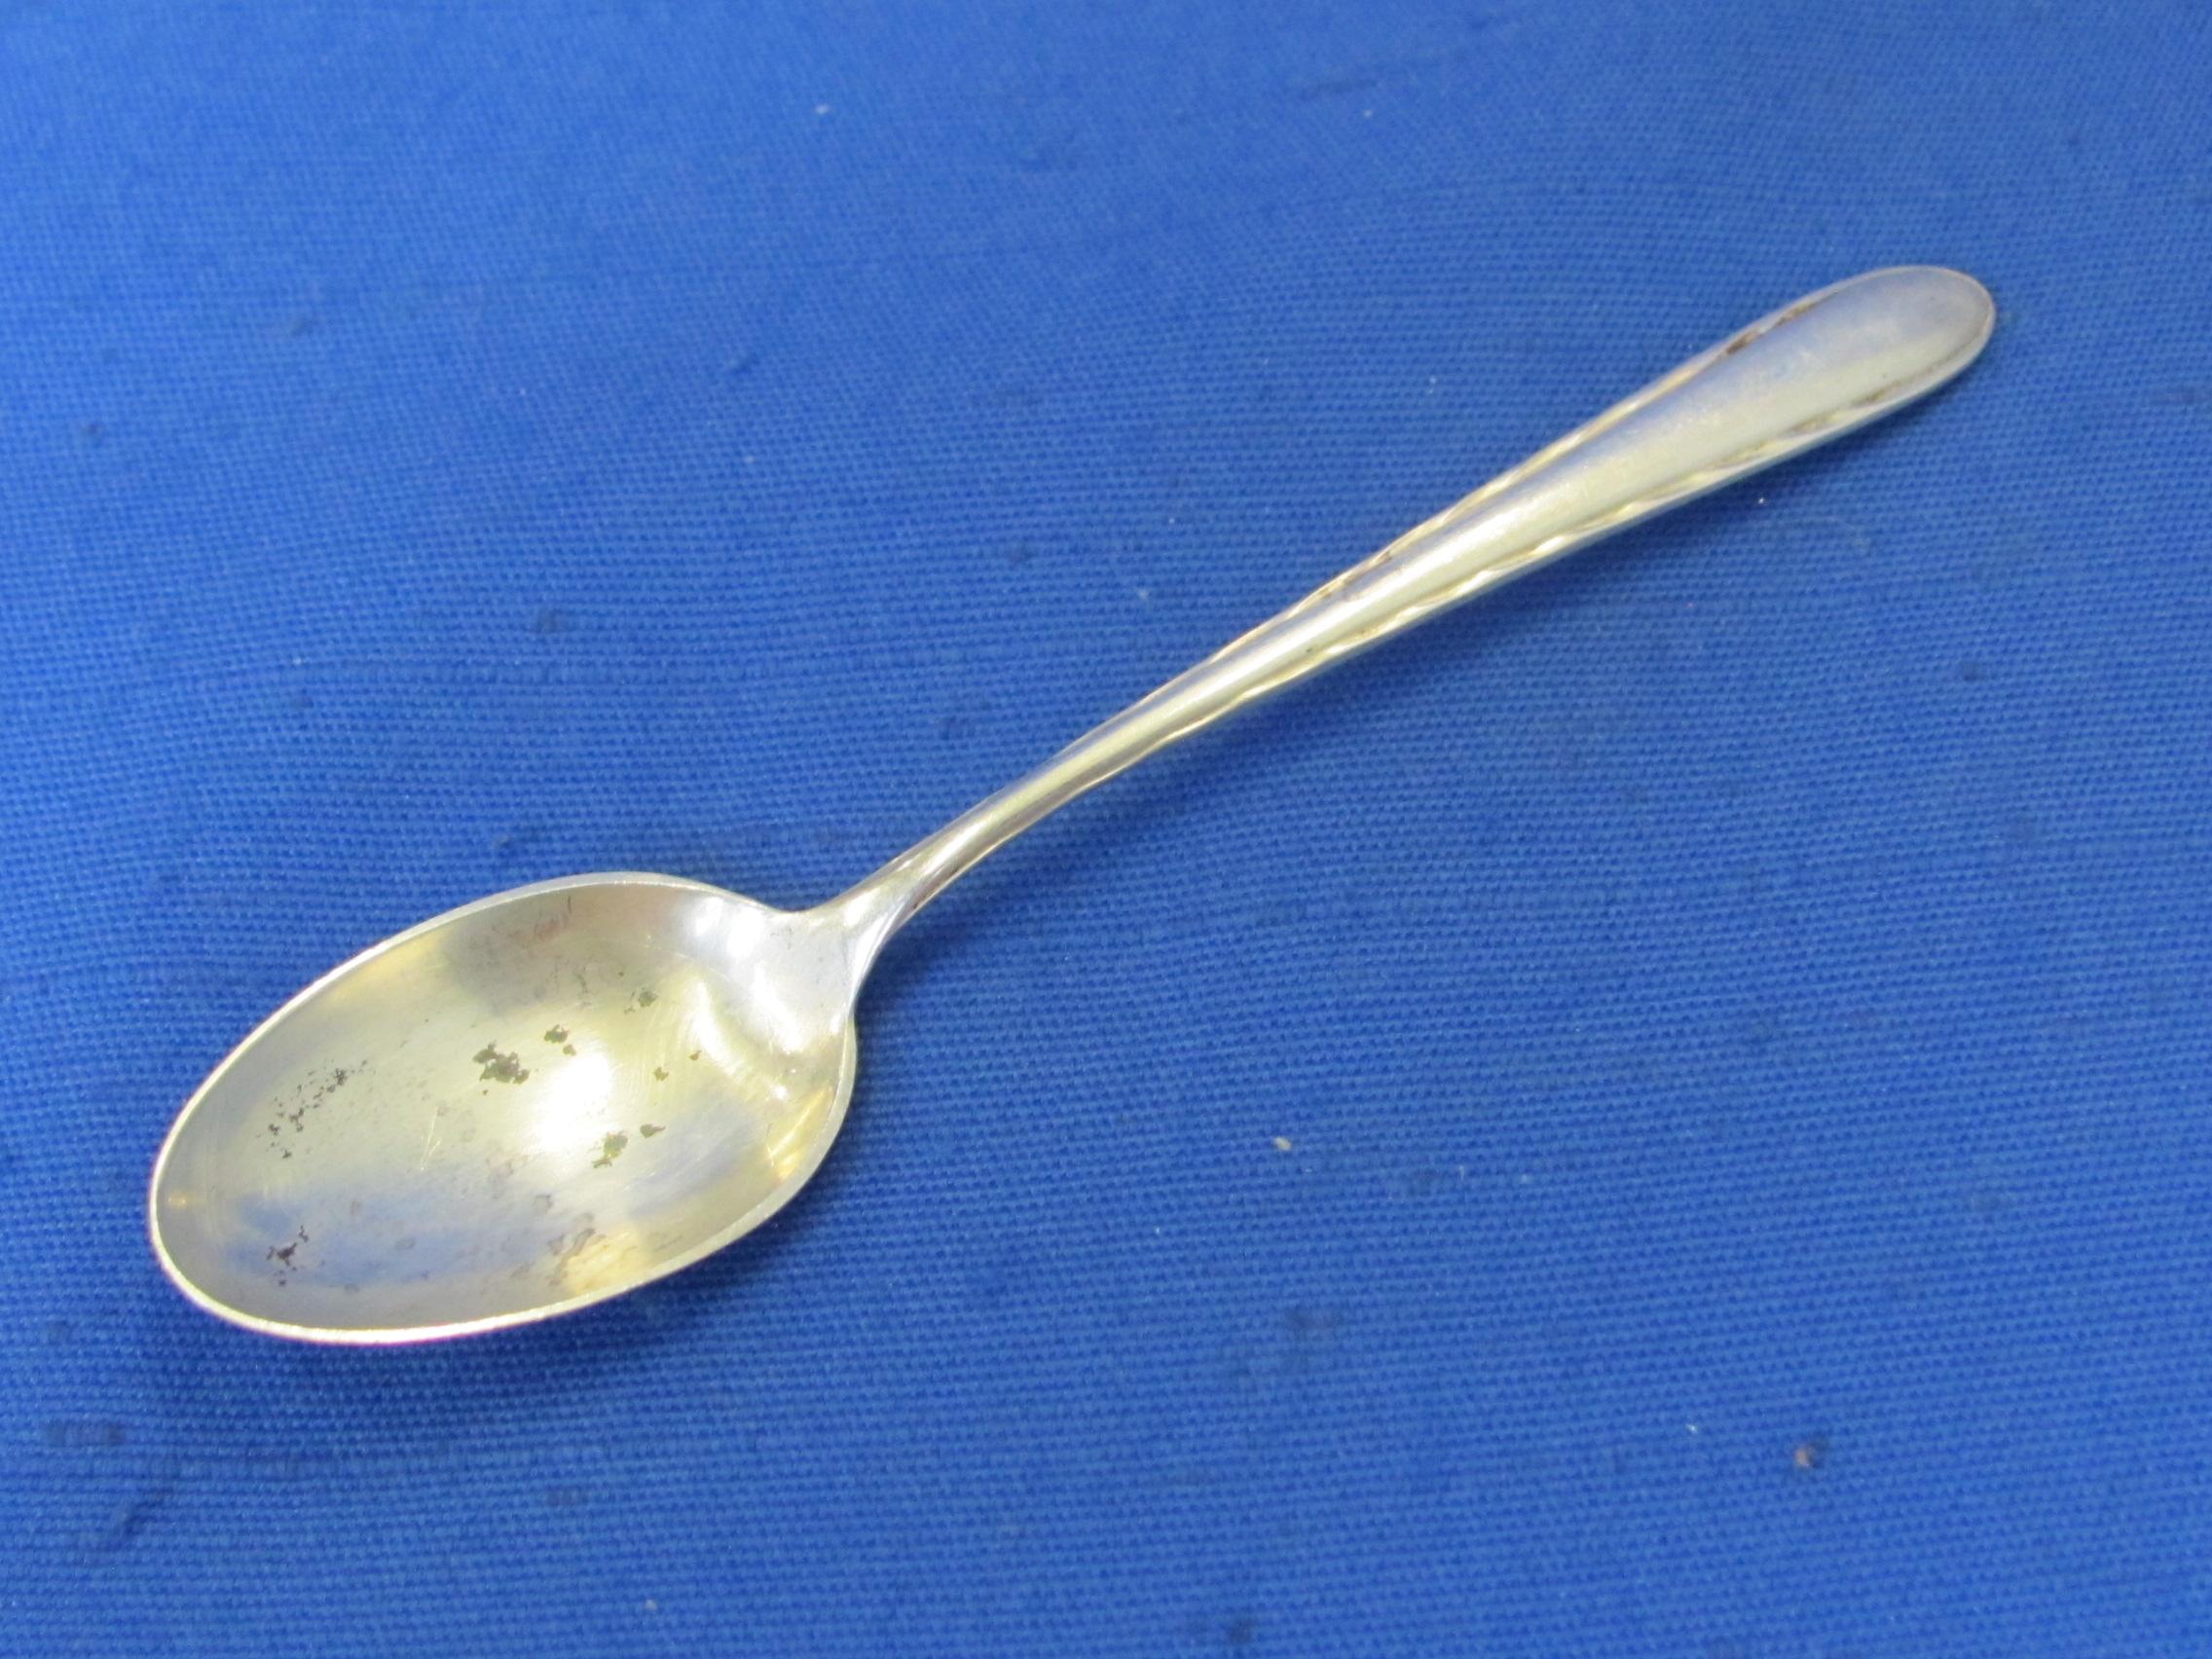 Towle Sterling Silver Demitasse Spoon in Silver Flutes pattern – 4 1/4” - 10.0 grams